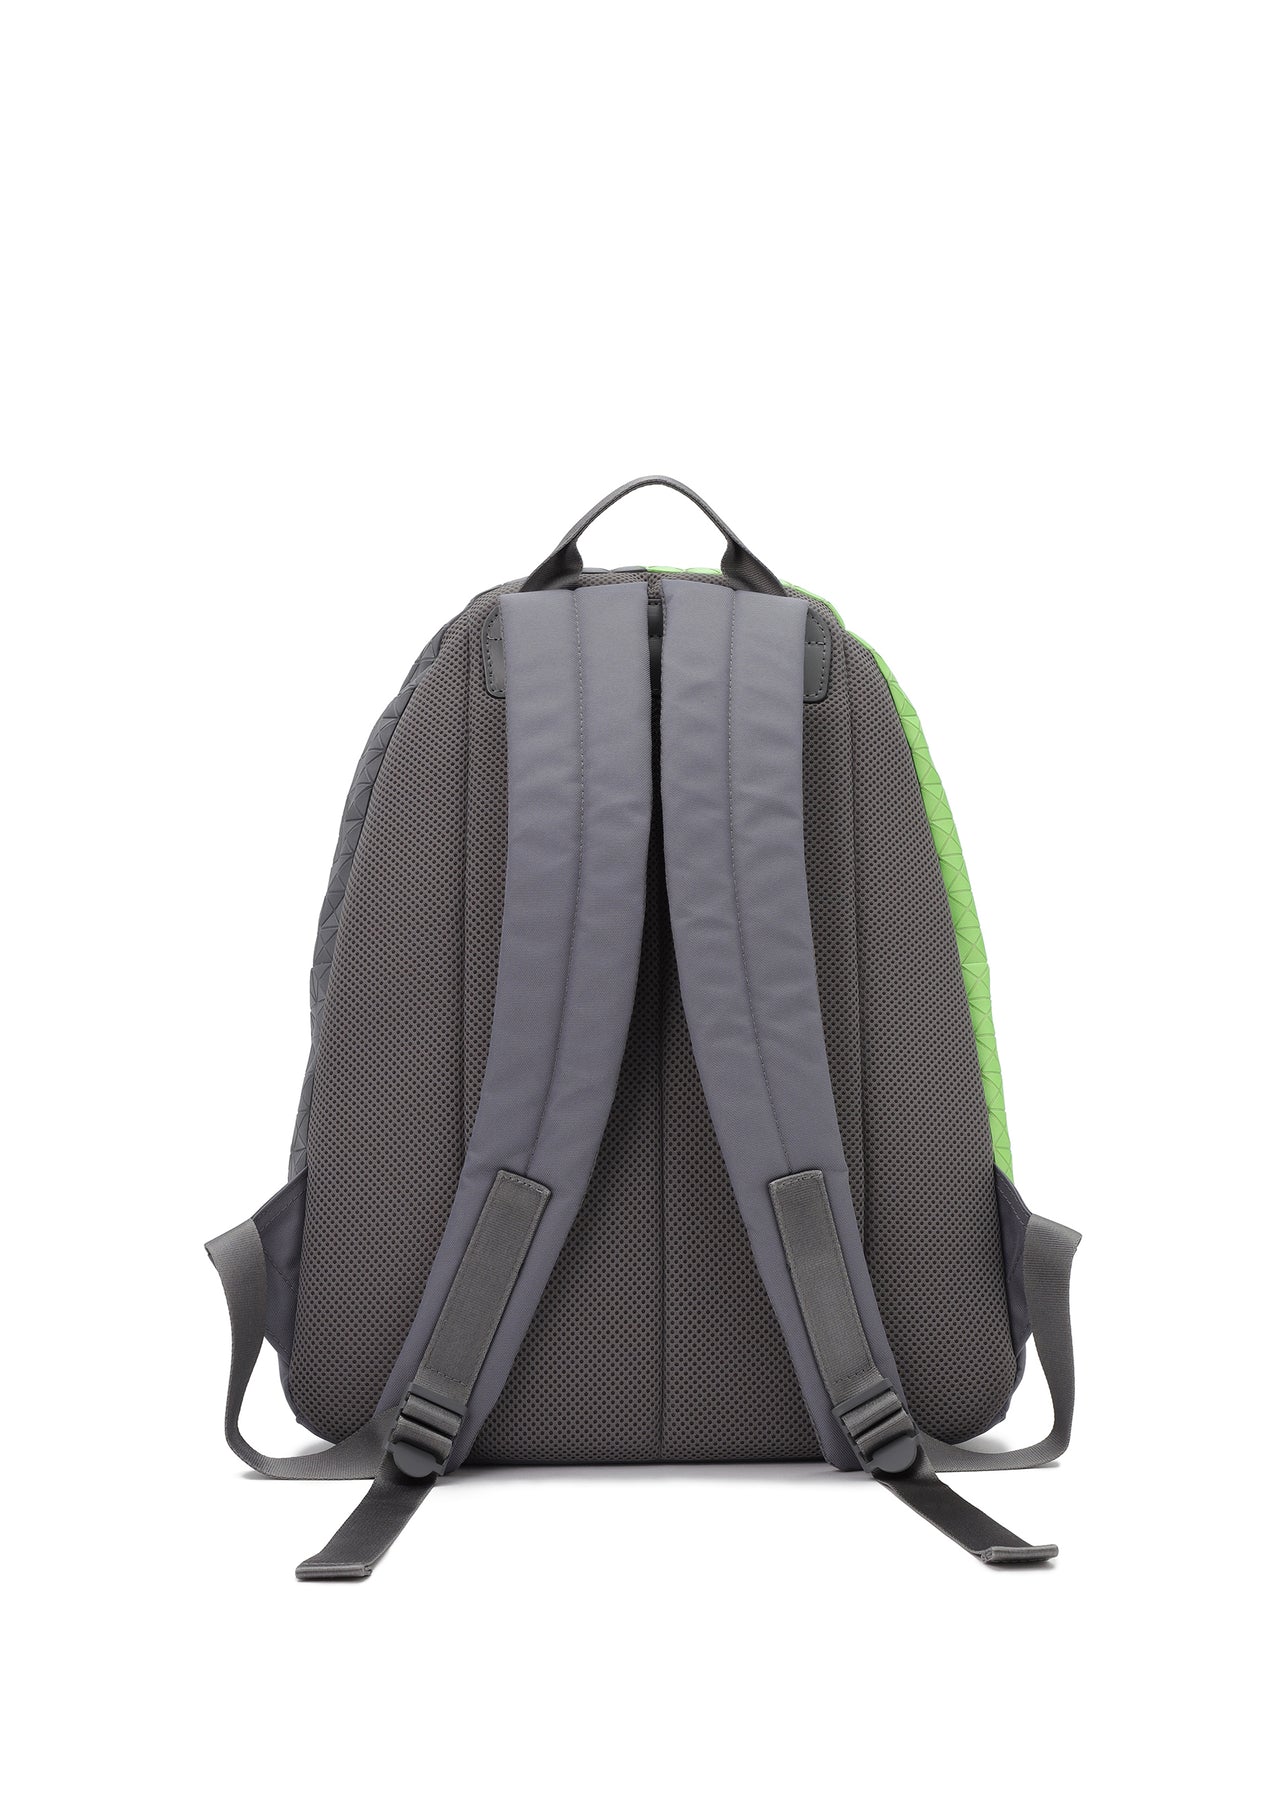 DAYPACK BACKPACK | The official ISSEY MIYAKE ONLINE STORE | ISSEY 